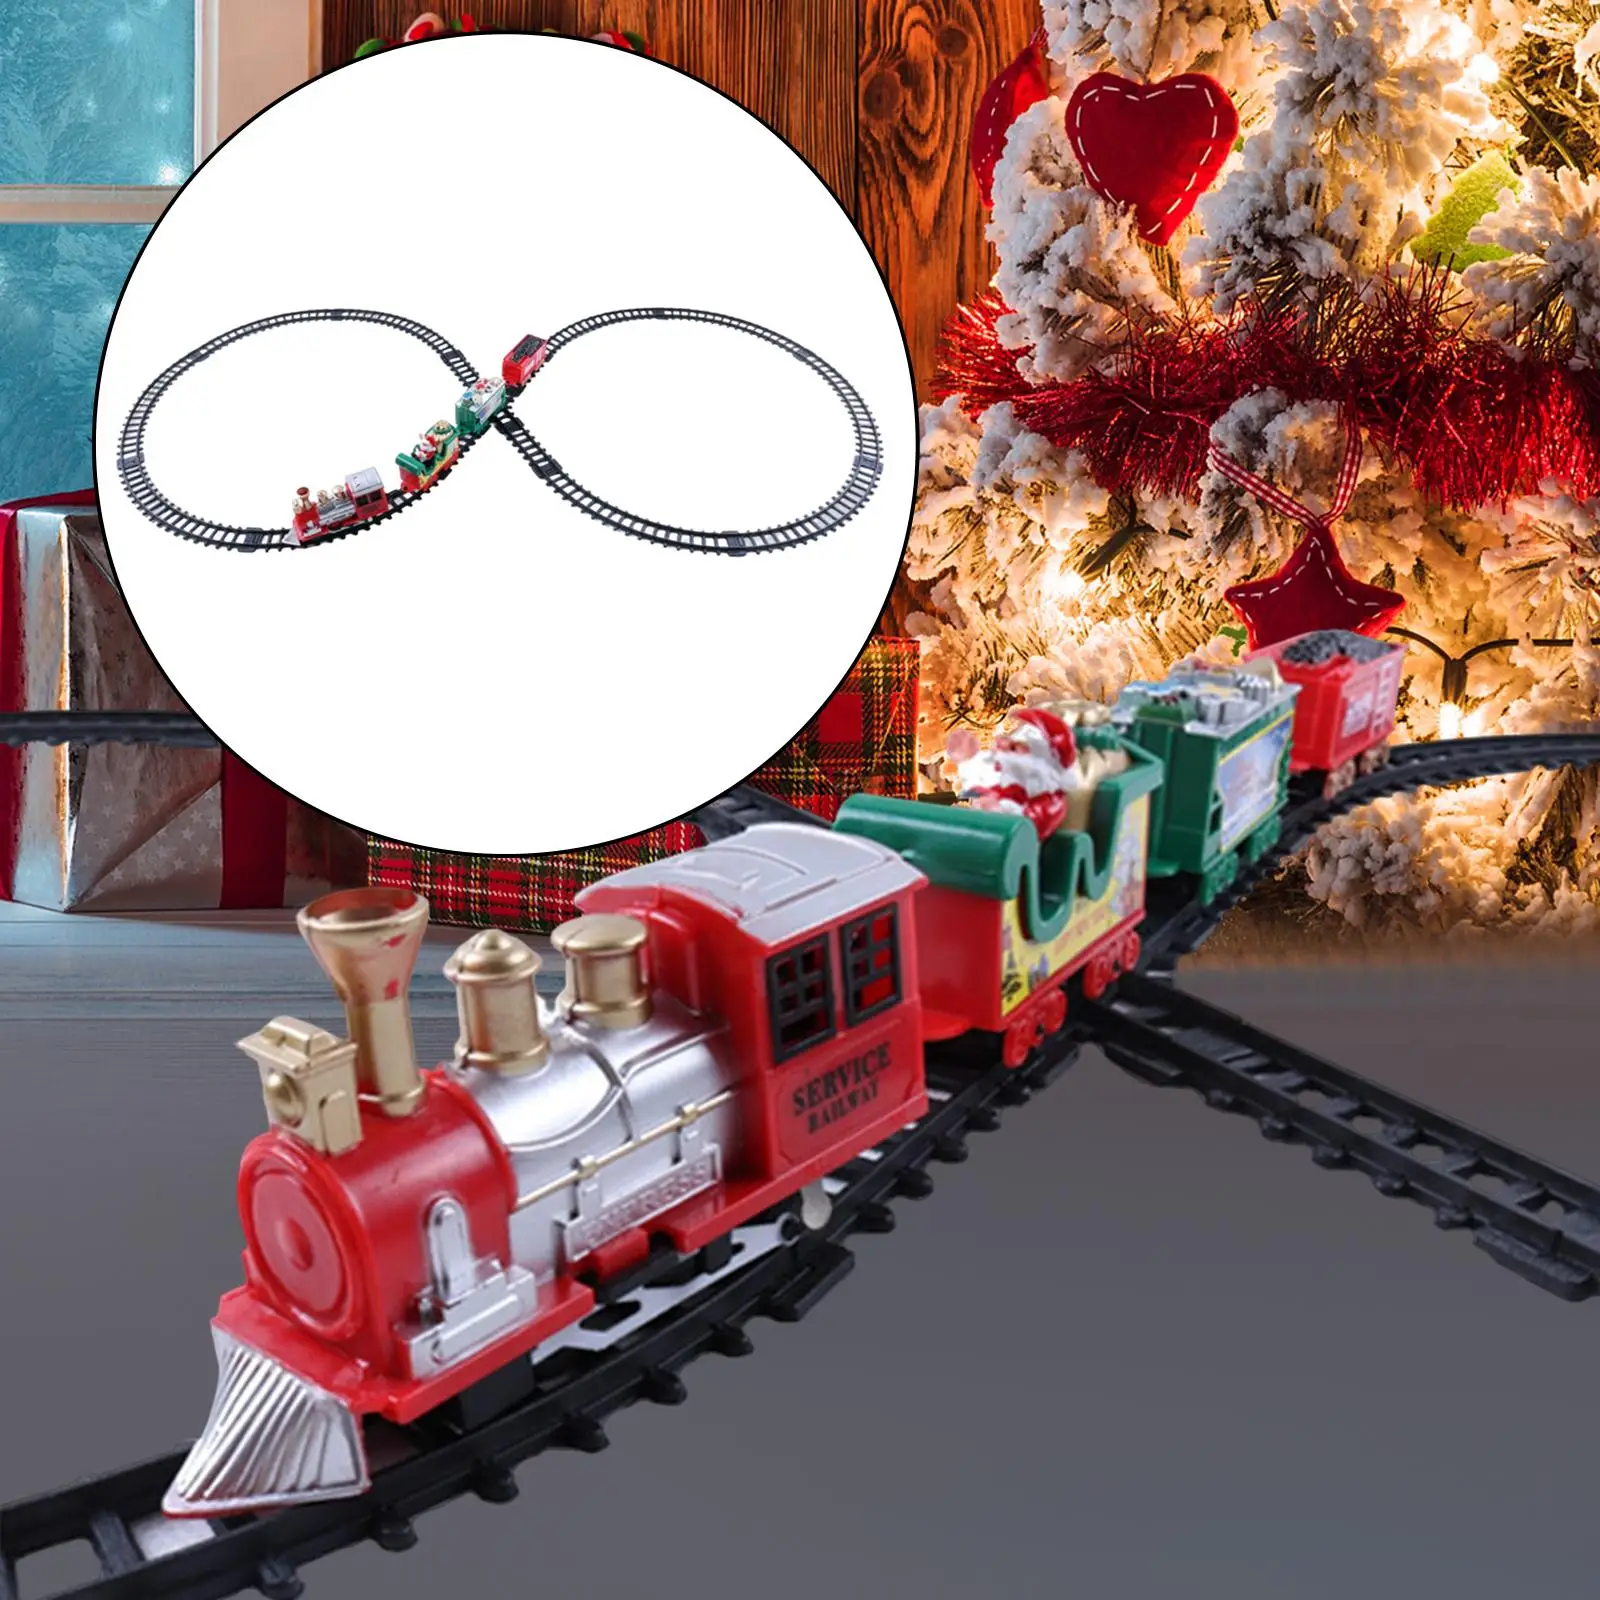 Electric Christmas Toy Train Xmas Tree Decors Kid Toy Railway Track Set for Toddlers Girls Boys New Year Preschool Gifts